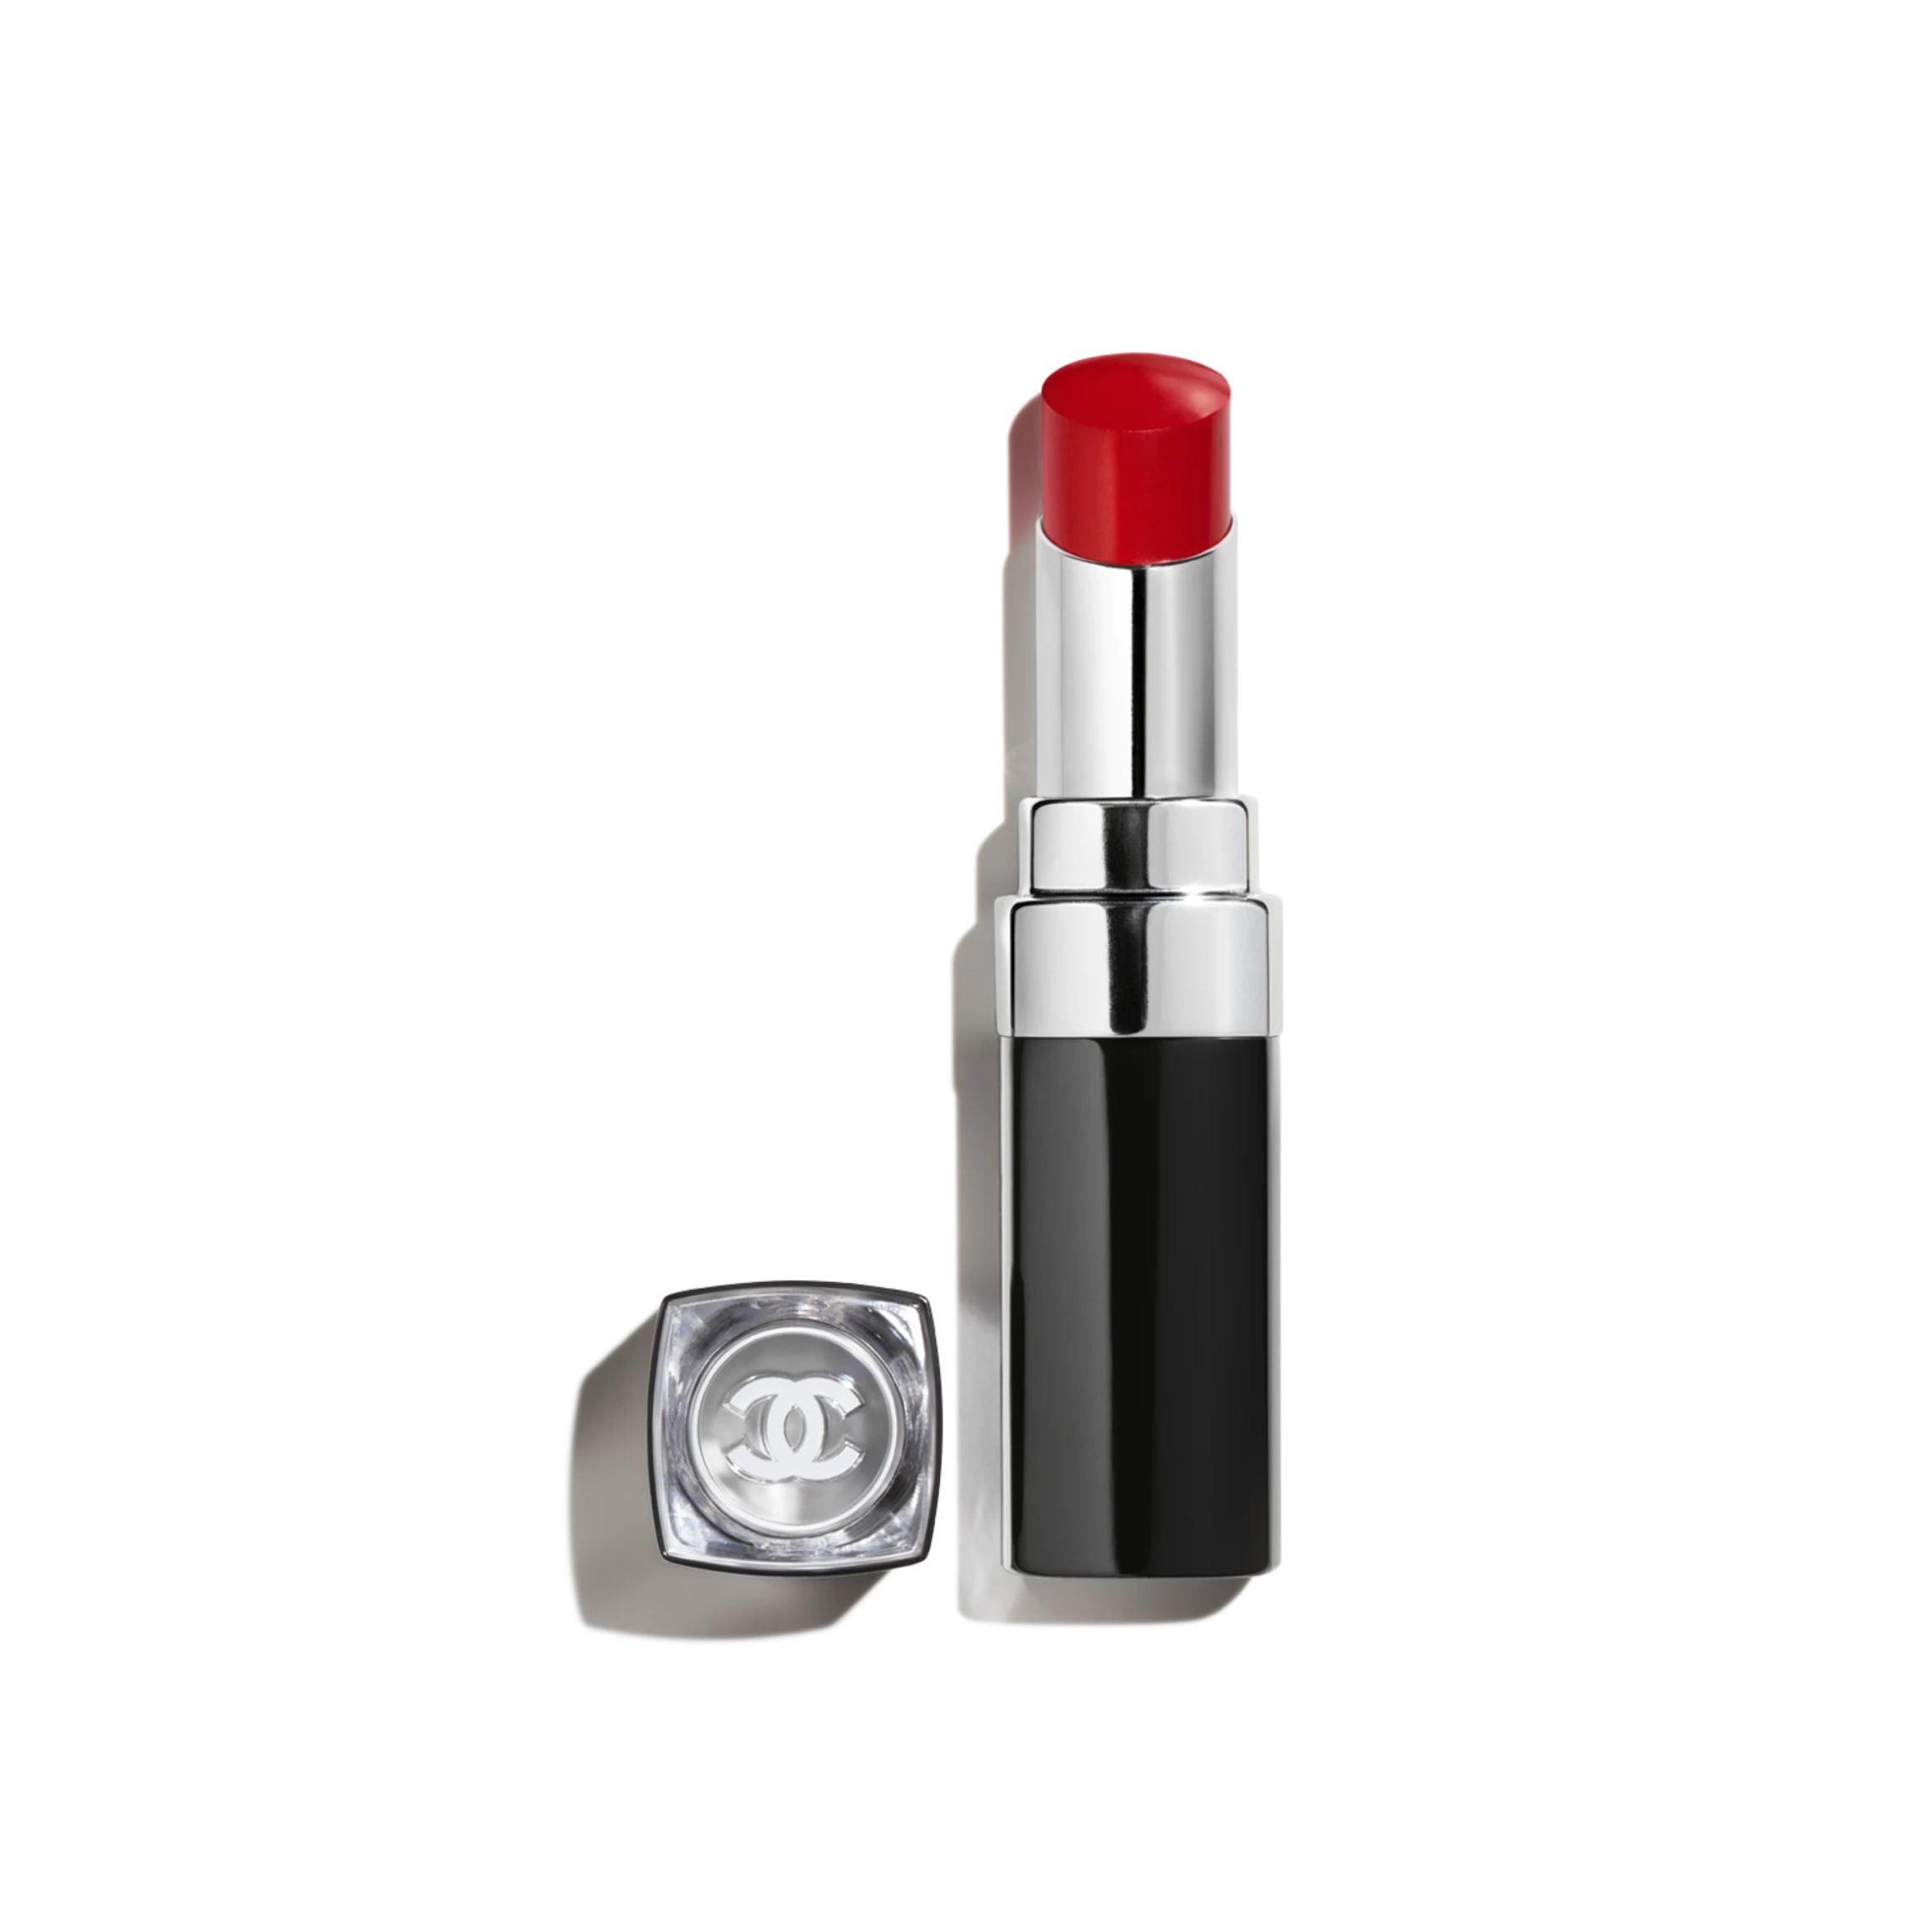 ROUGE COCO BLOOM Hydrating plumping intense shine lip colour 158 - Bright | CHANEL | Chanel, Inc. (US)